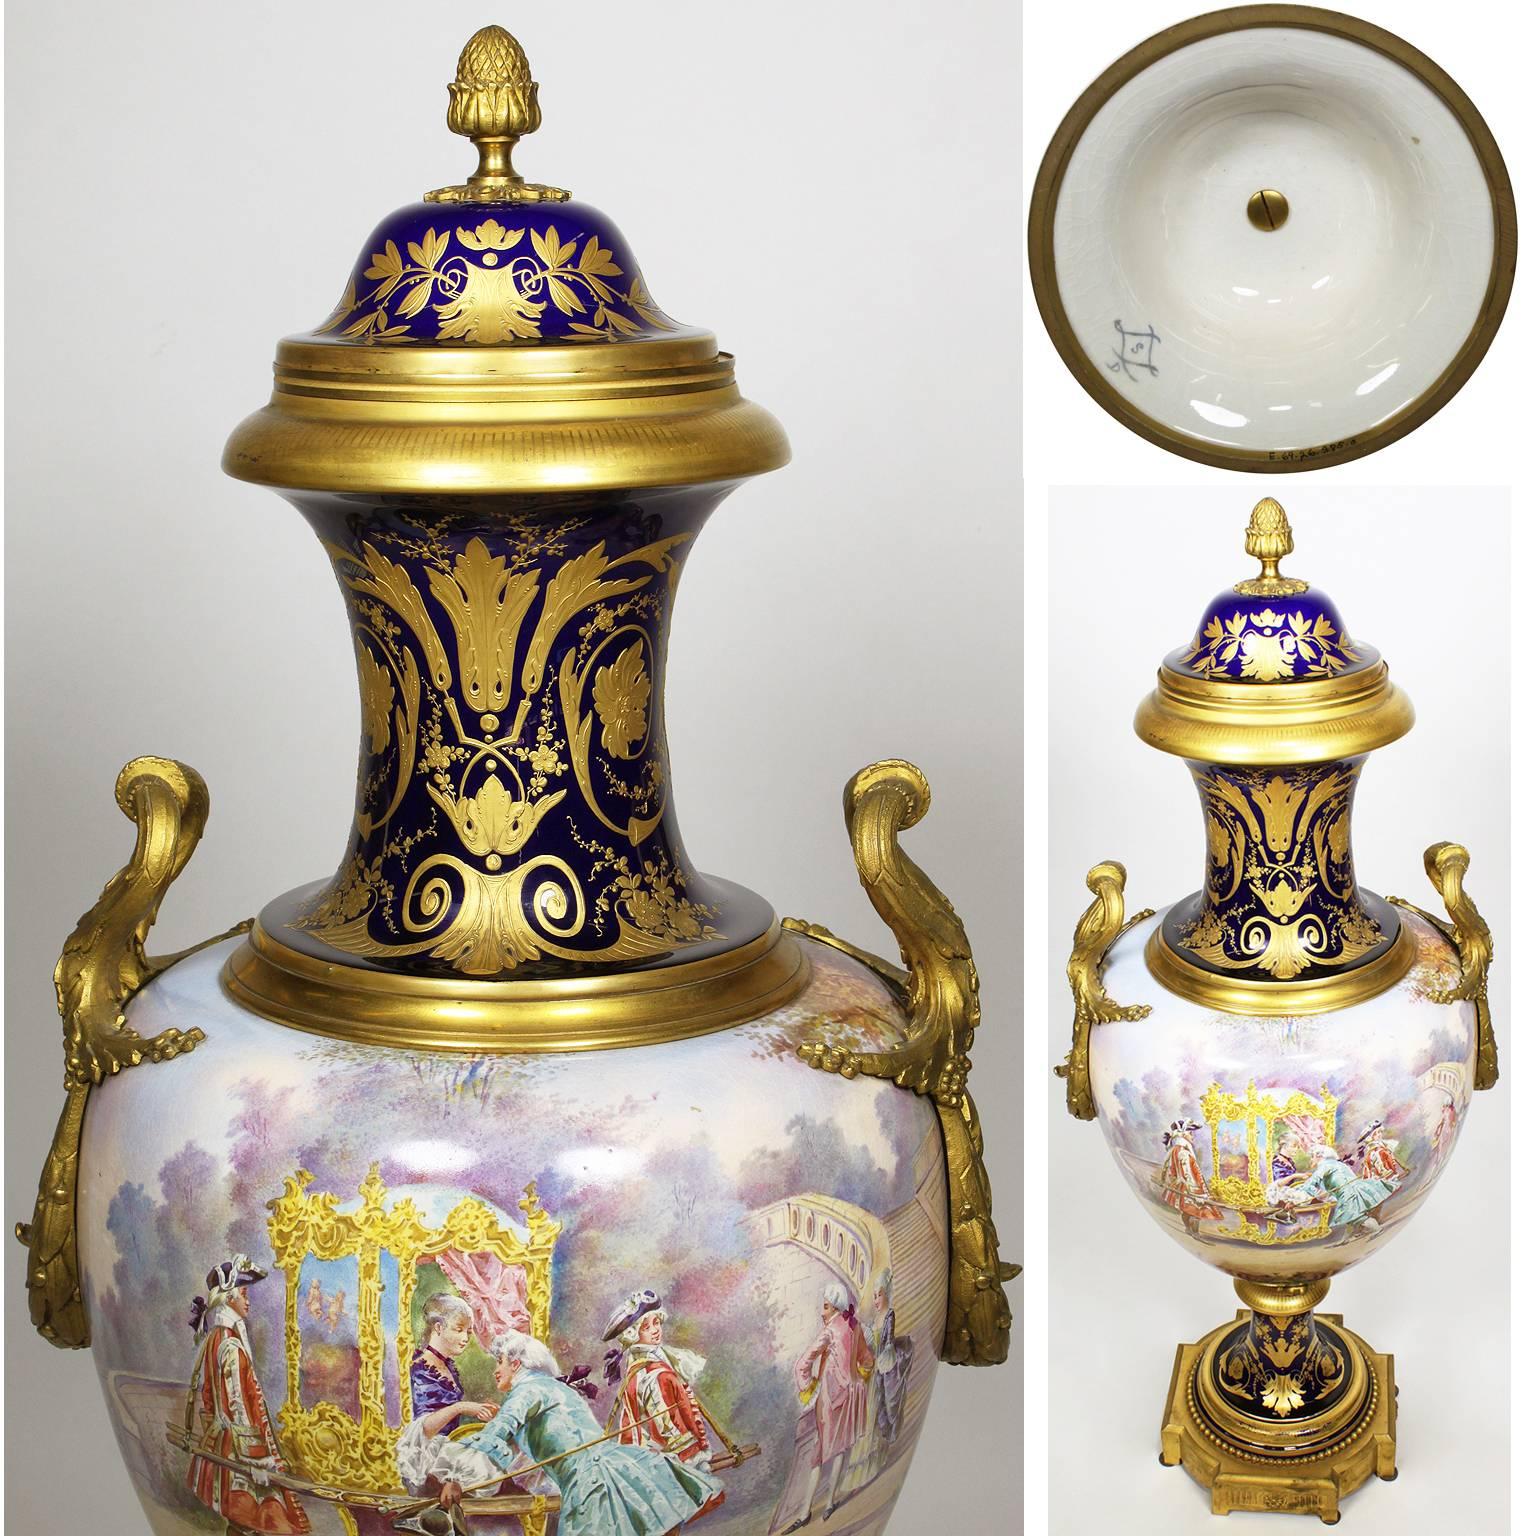 French 19th Century Napoleon III Sévres Style Porcelain and Ormolu Mounted Urn For Sale 5